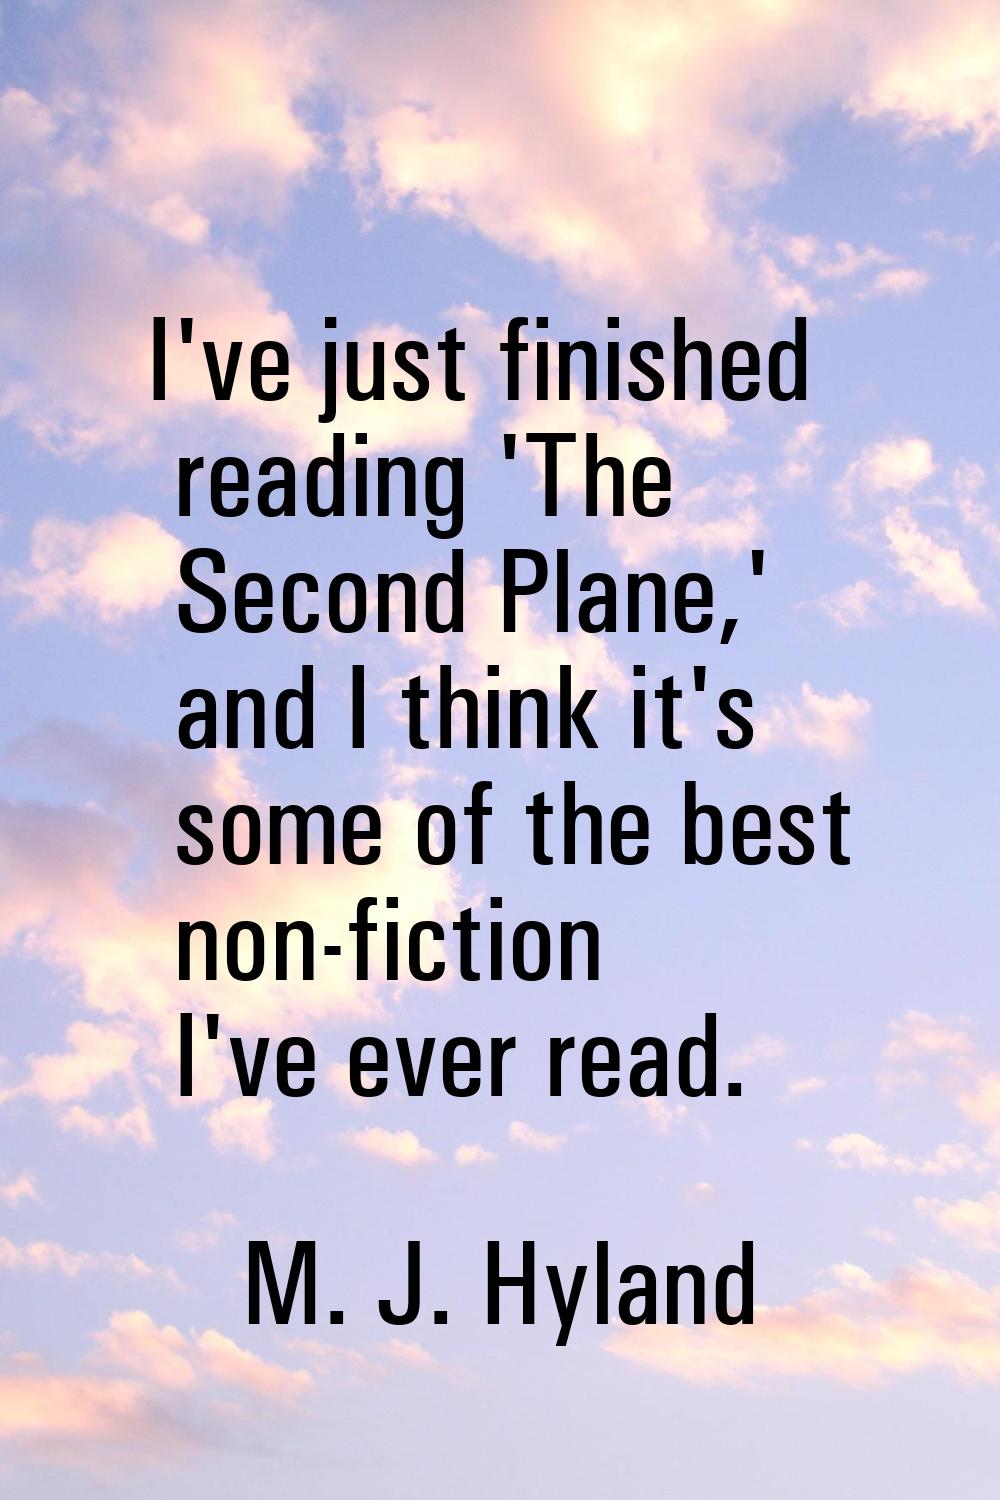 I've just finished reading 'The Second Plane,' and I think it's some of the best non-fiction I've e